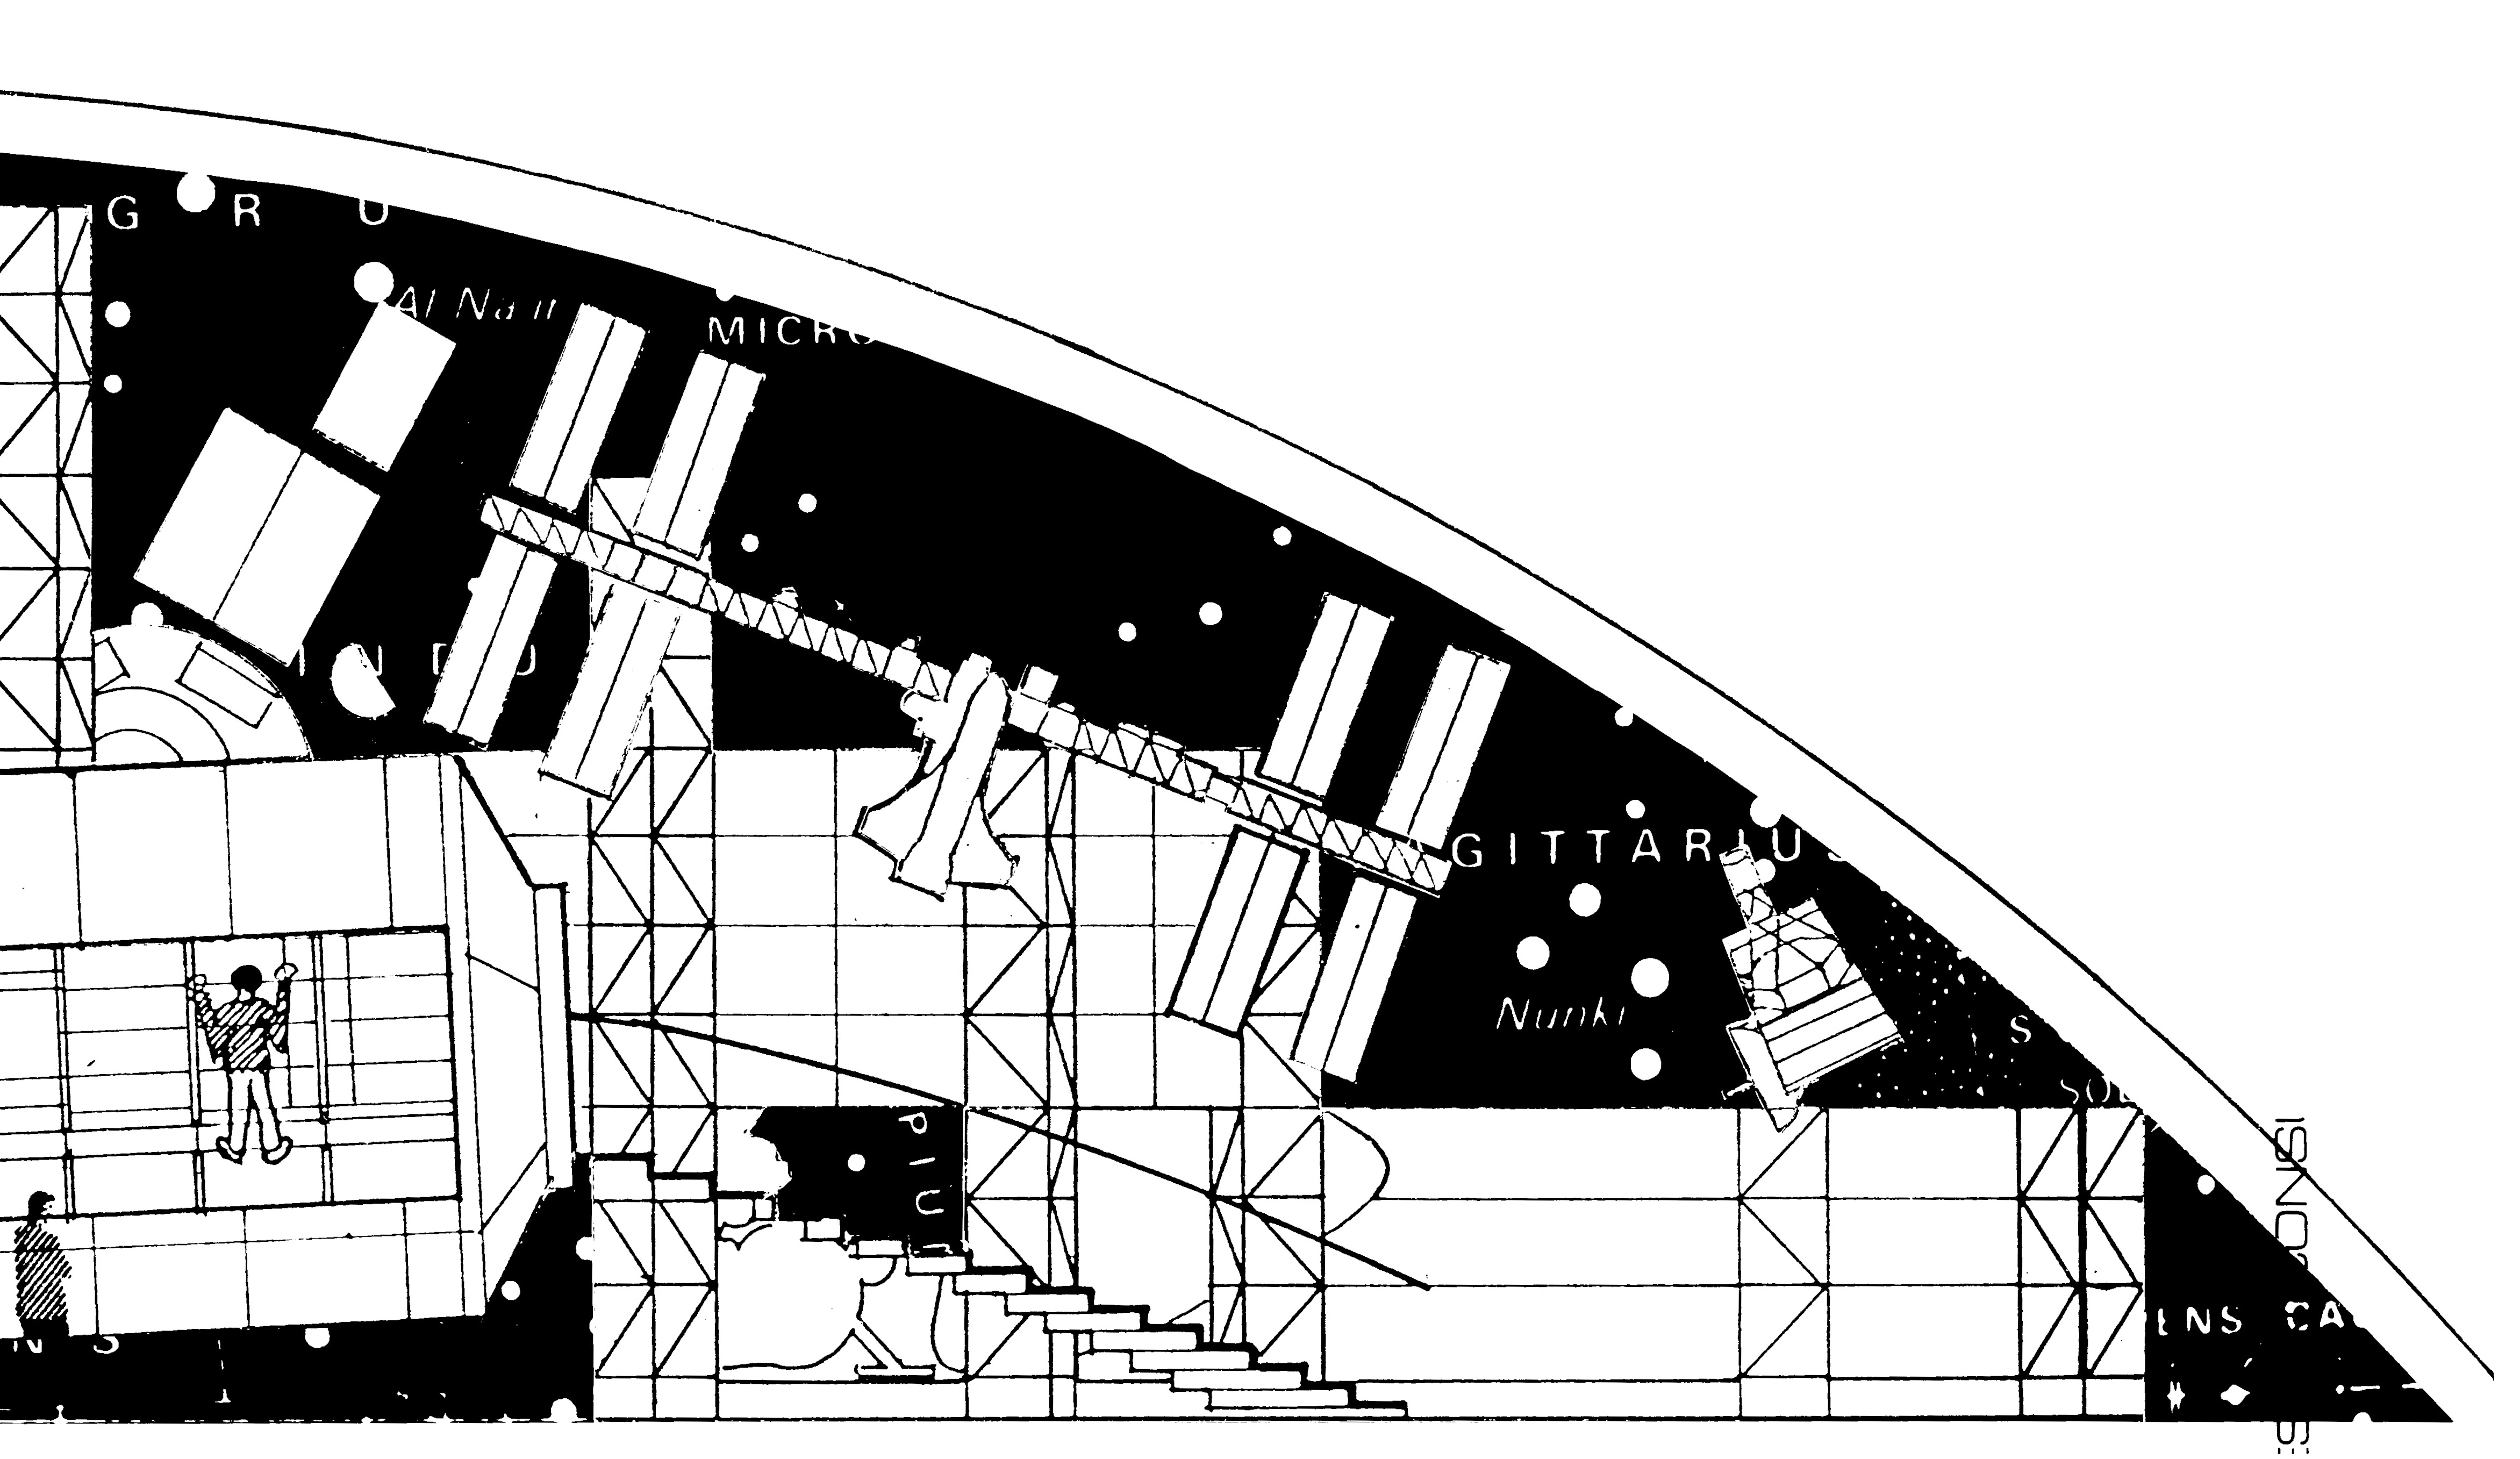 Sketch of the inside of the exhibit at ground level with the dome above it, right.